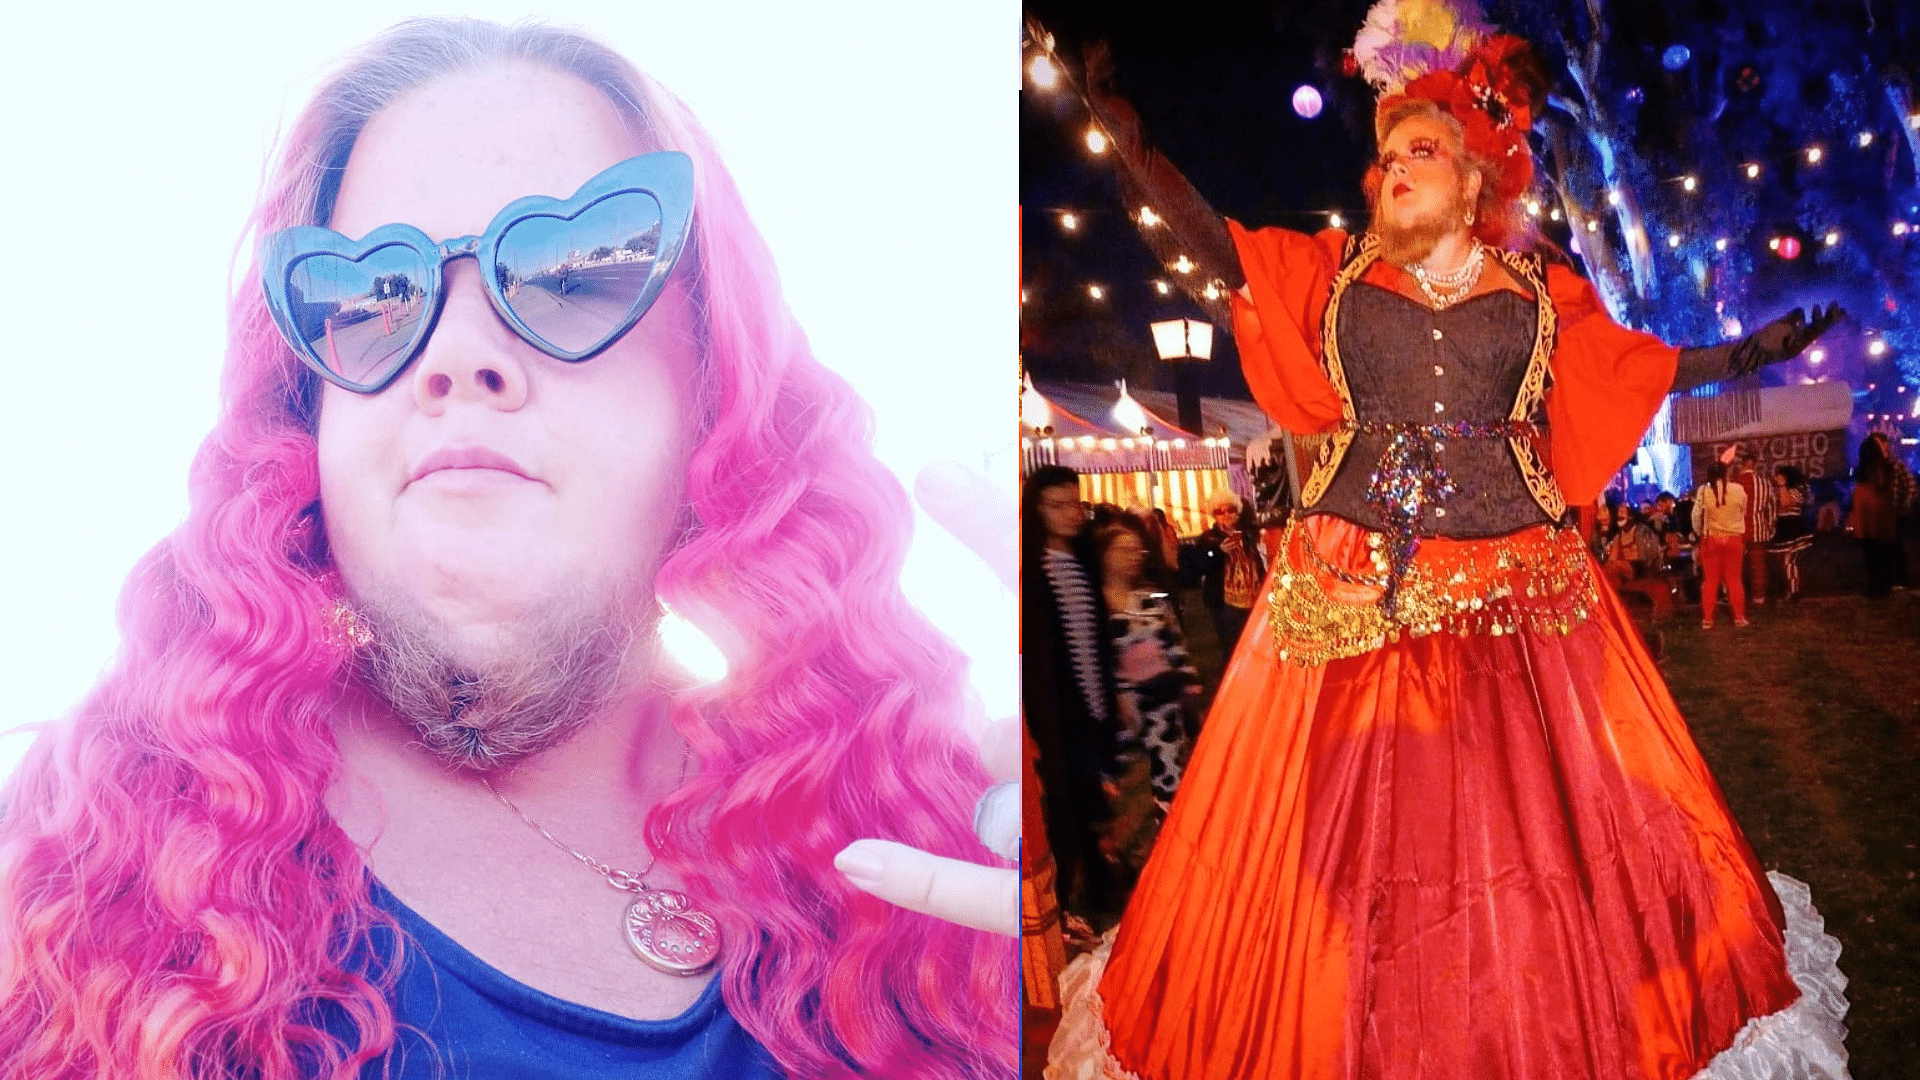 Jessa The Bearded Lady with beard and moustache has five boyfriends in polyamory relationship